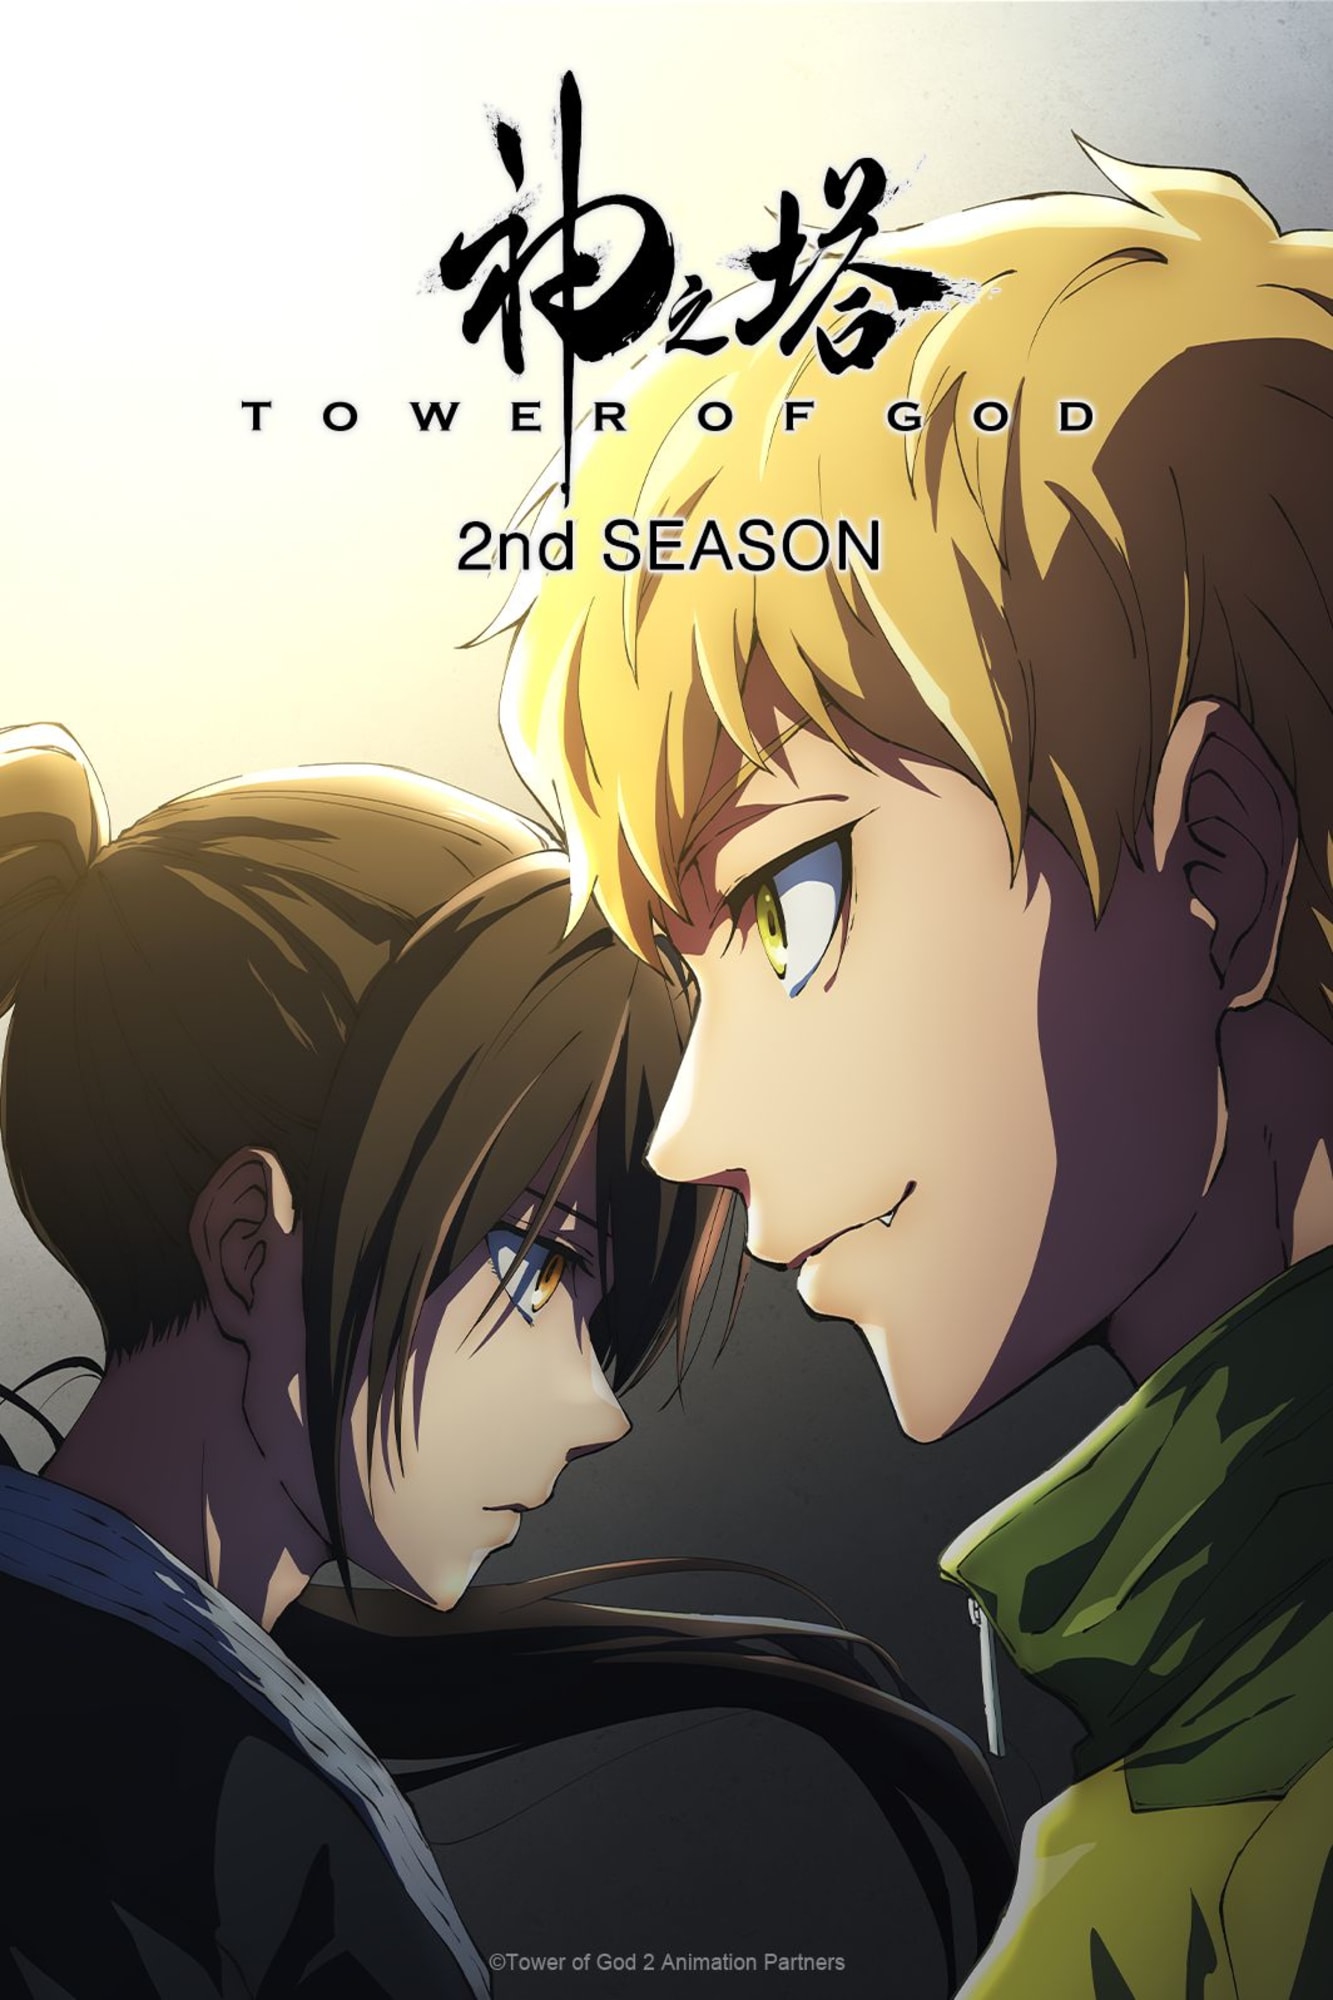 Tower of God season 2 confirmed! (Here's what to know)